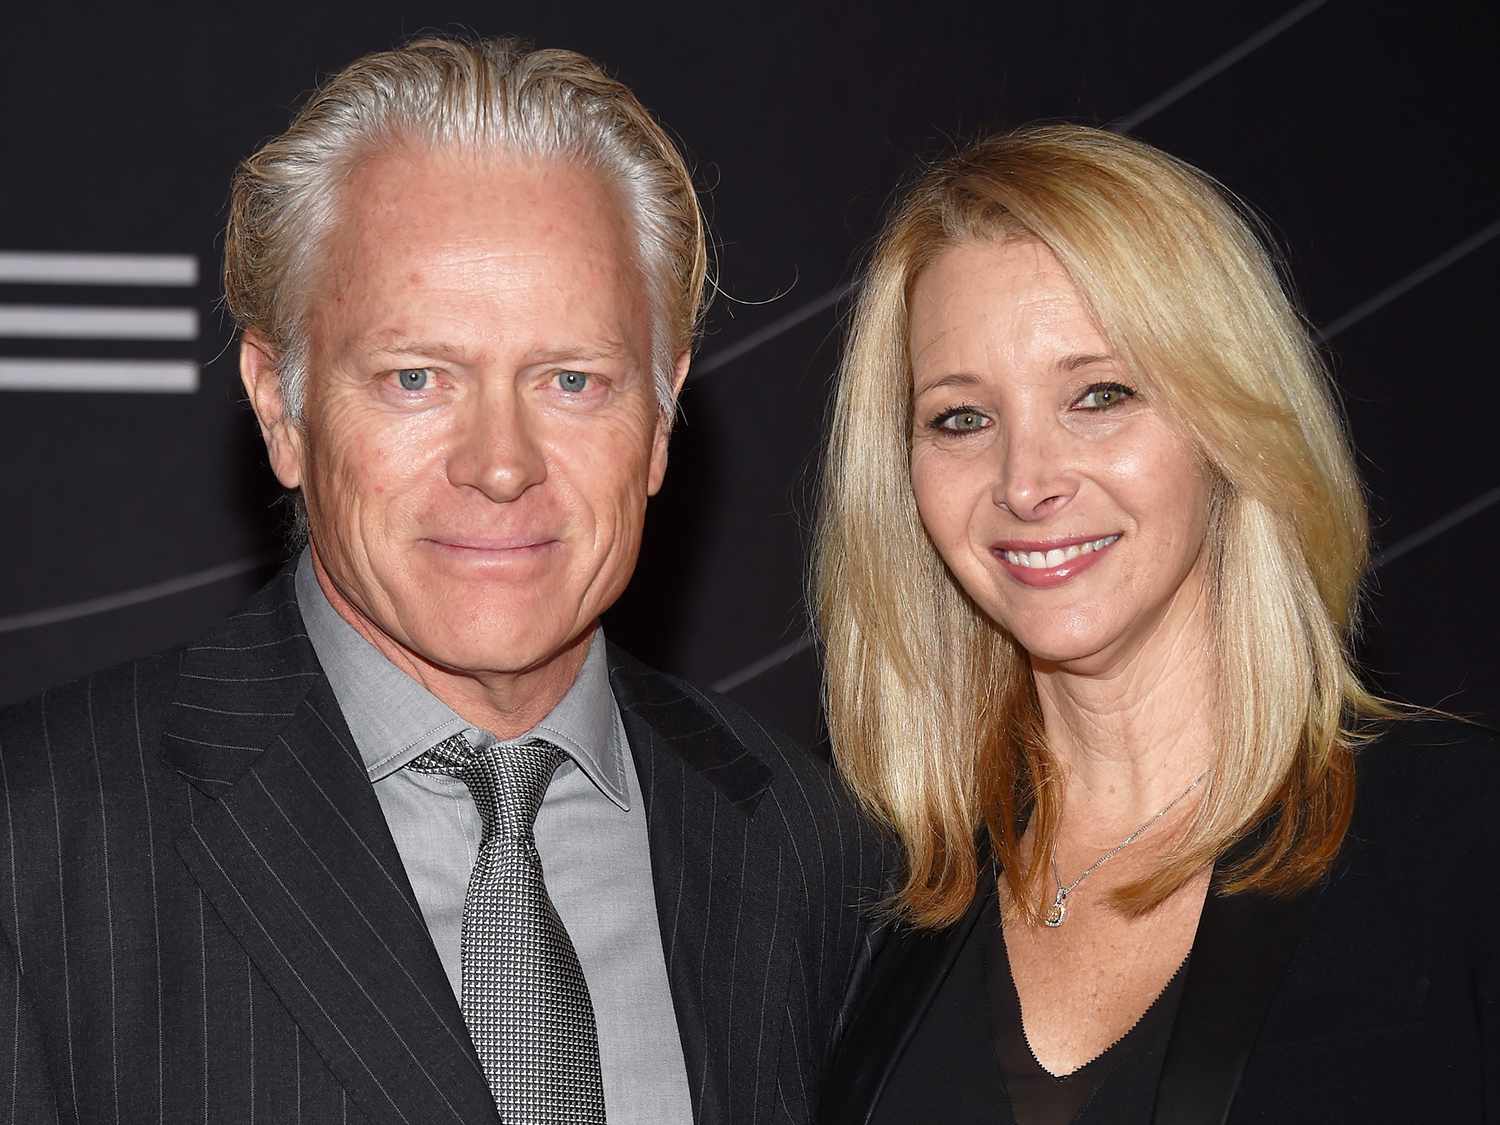 Michel Stern with his wife Lisa Kudrow at an event